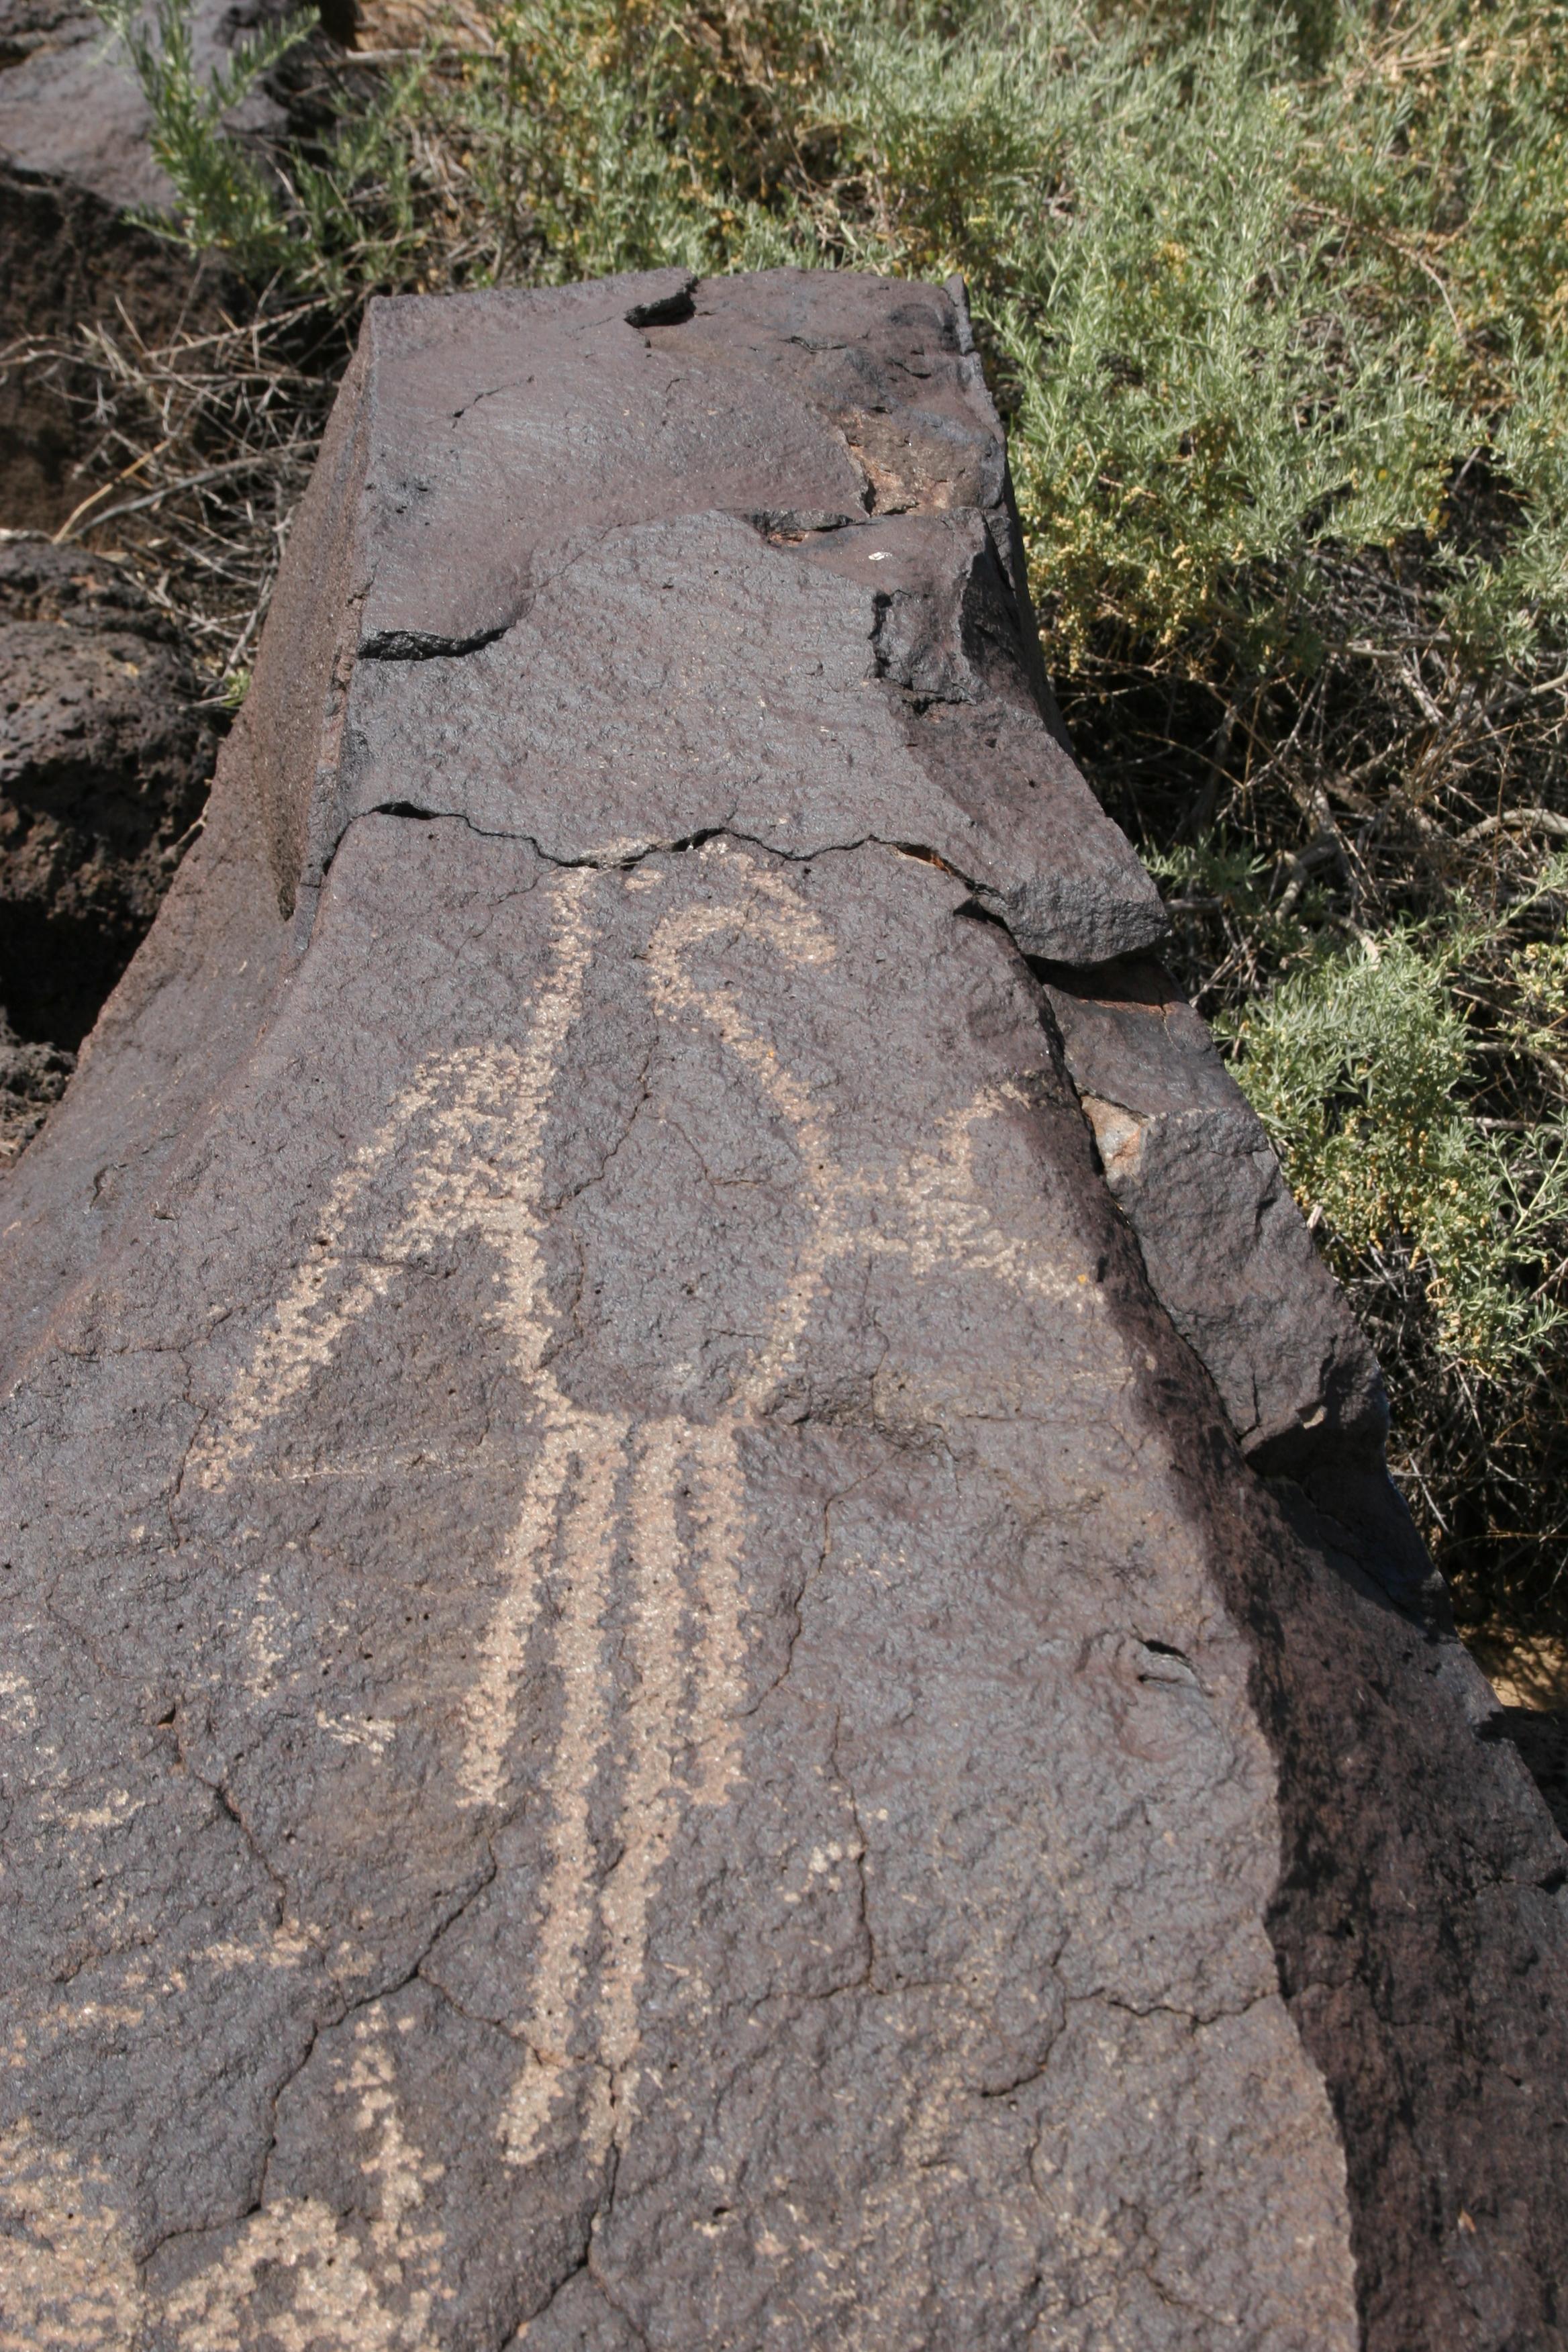 Petroglyph of a macaw parrot along the Macaw Trail in Boca Negra Canyon.